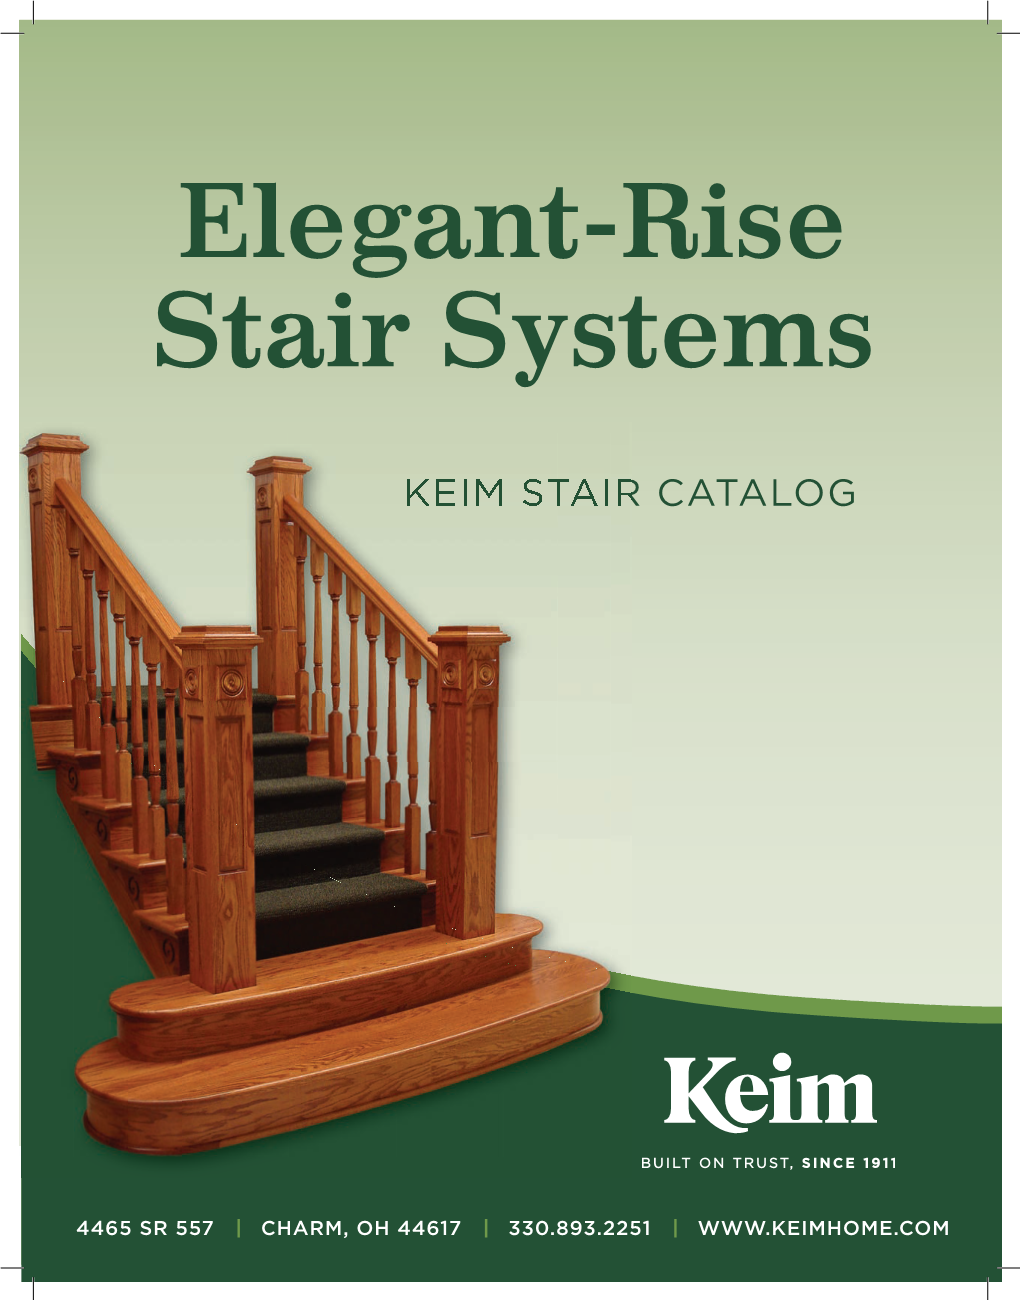 Stair Catalog 2020 Update.Indd